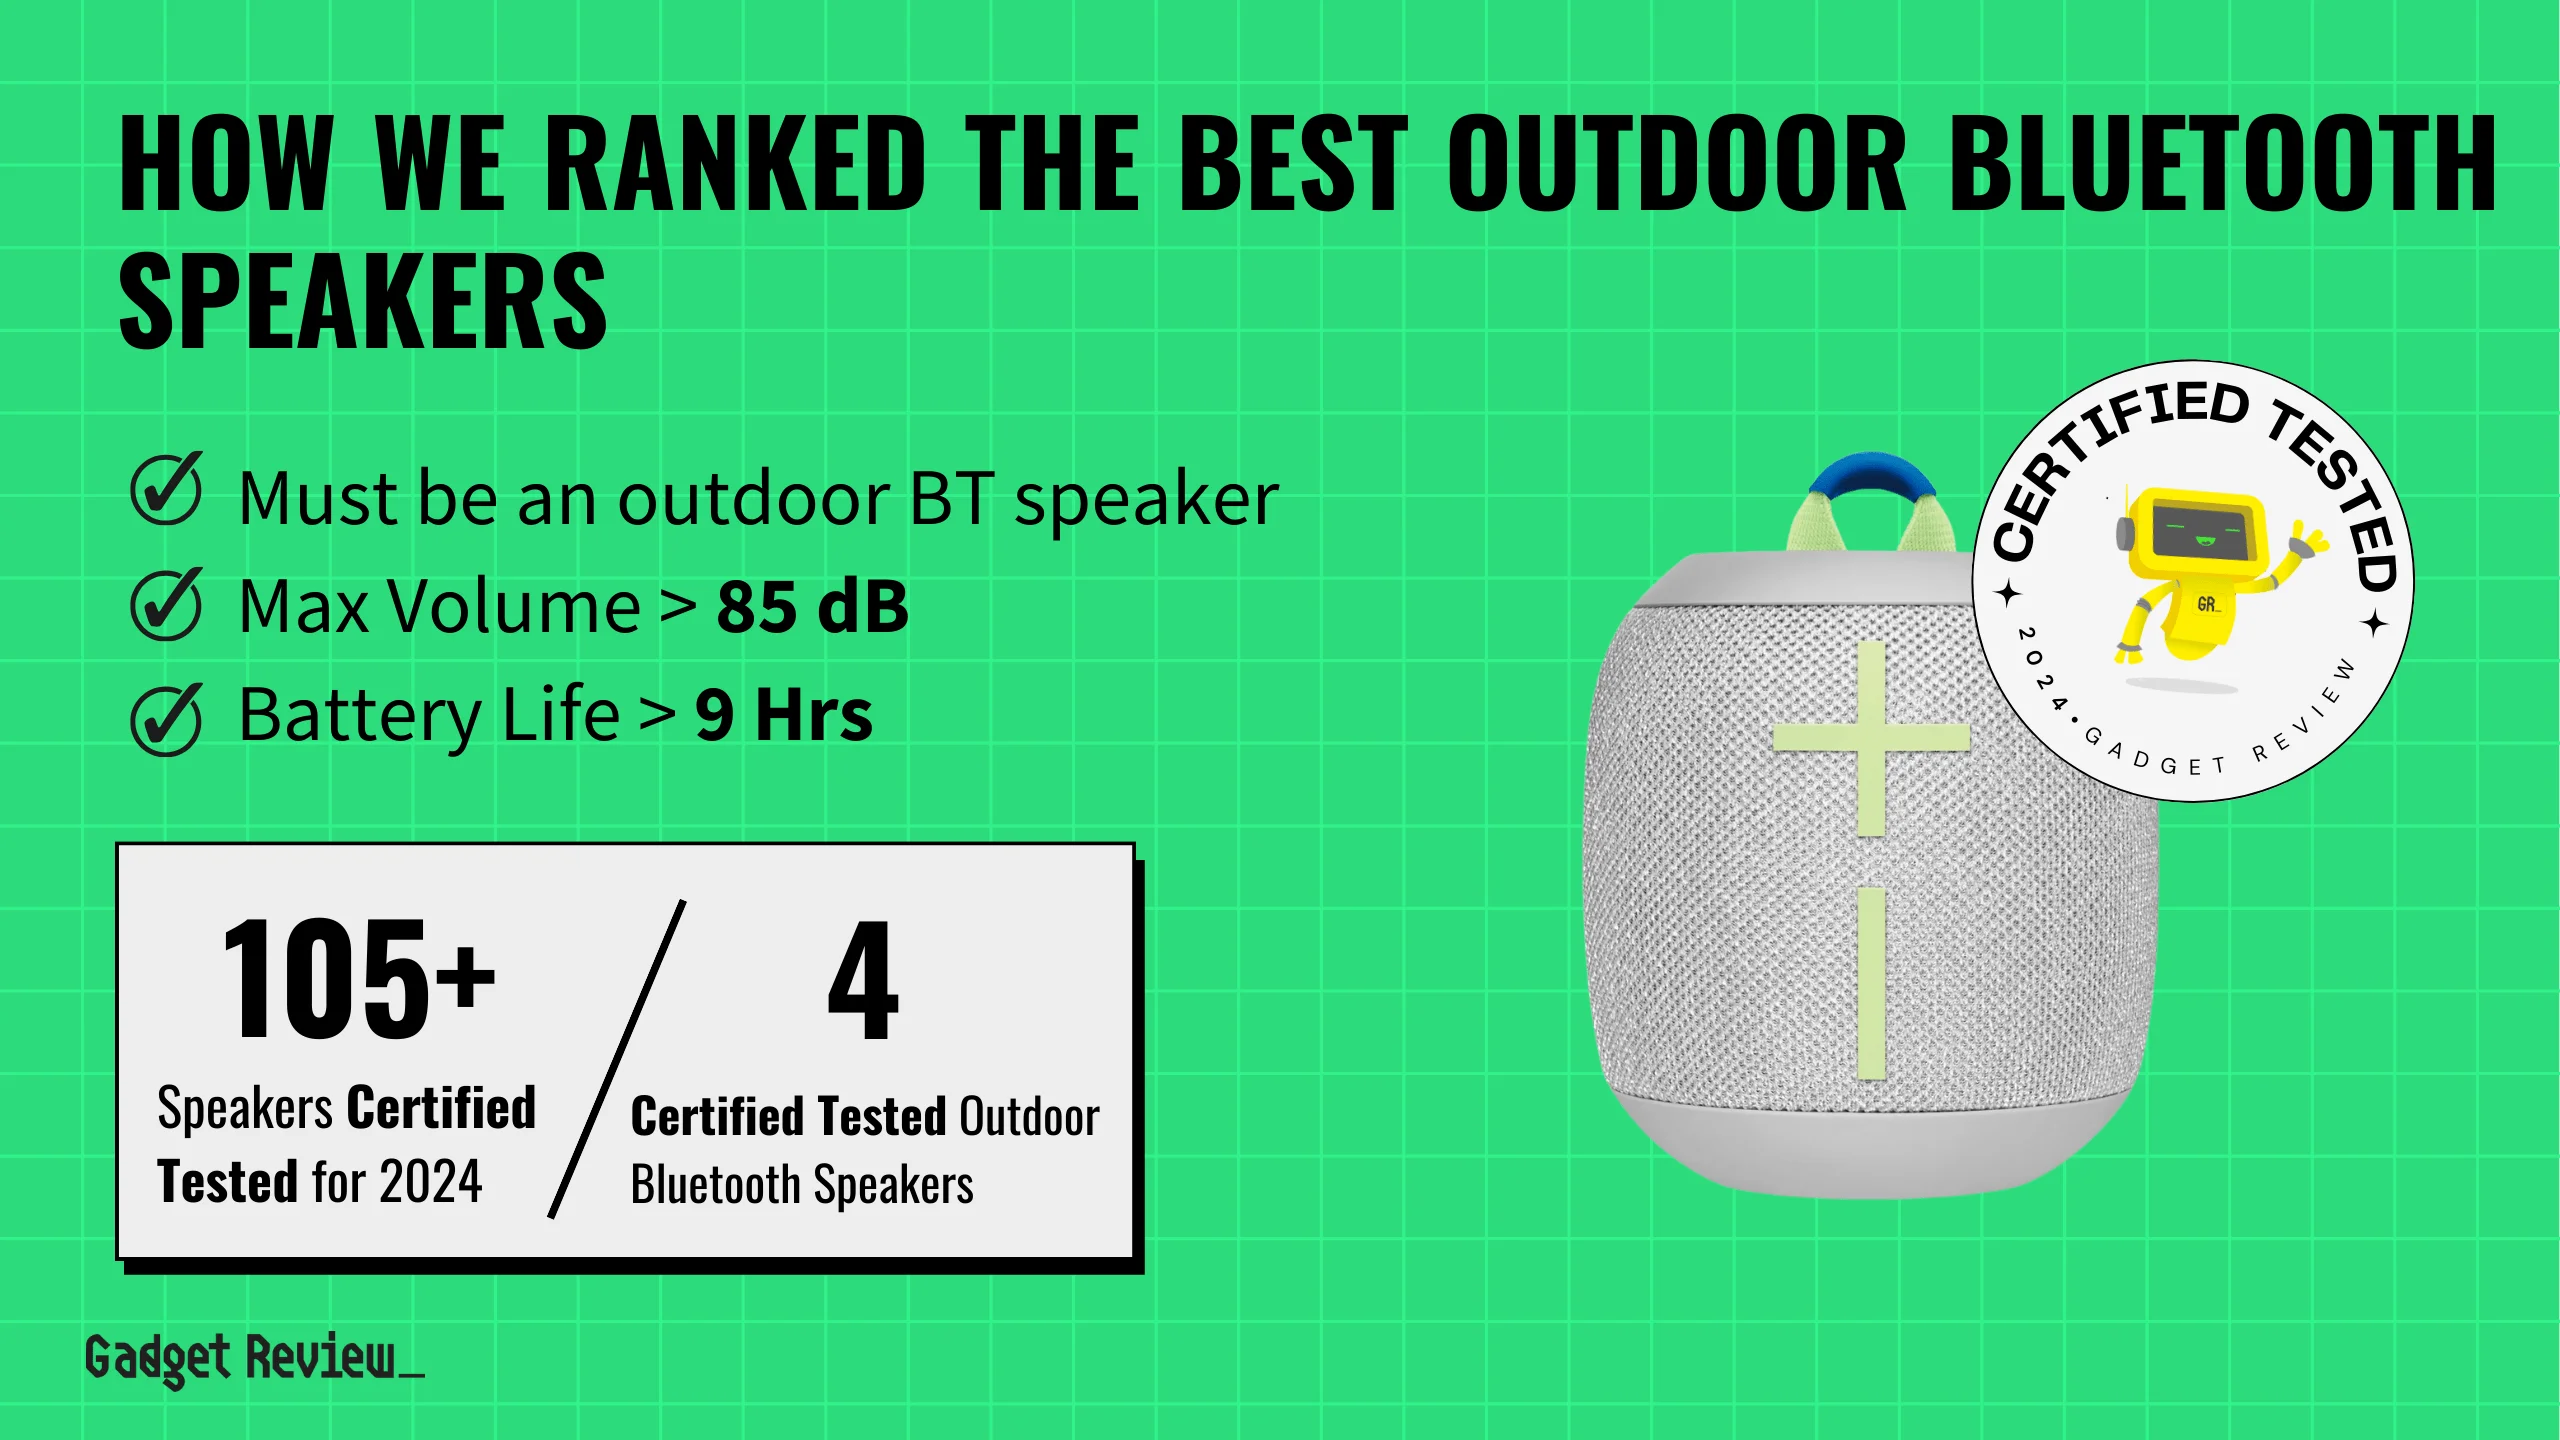 How We Ranked The 4 Best Outdoor Bluetooth Speakers